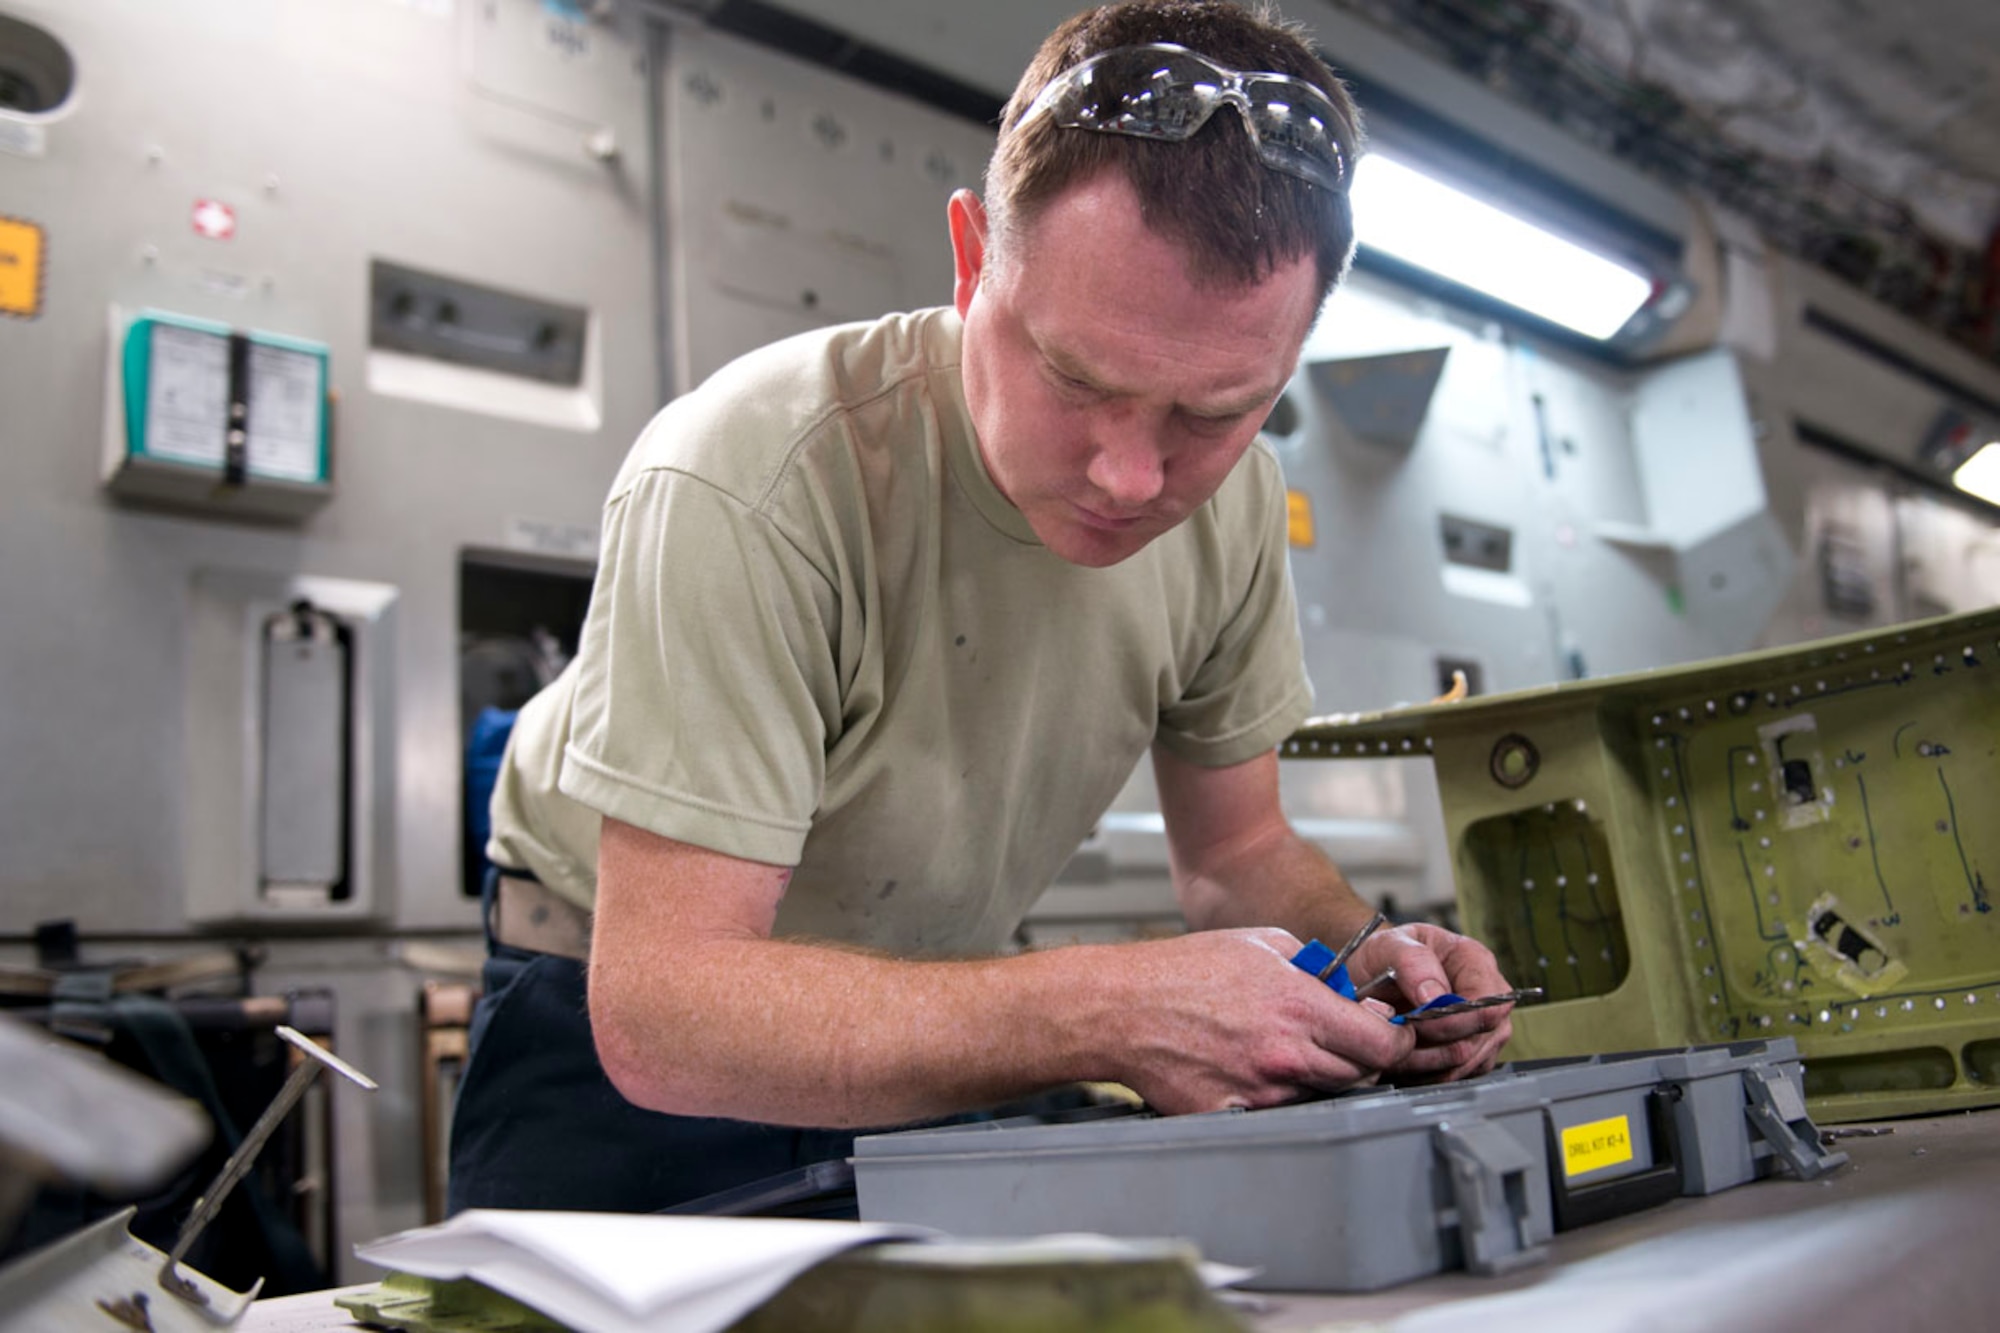 Tech. Sgt. Anthony Scolaro, an aircraft structural maintenance technician, references technical specifications as he looks for a tool while completing a repair on a jack support box for a C-17 Globemaster III aircraft, May 15, at the 167th Airlift Wing.(U.S. Air National Guard photo by Senior Master Sgt. Emily Beightol-Deyerle)